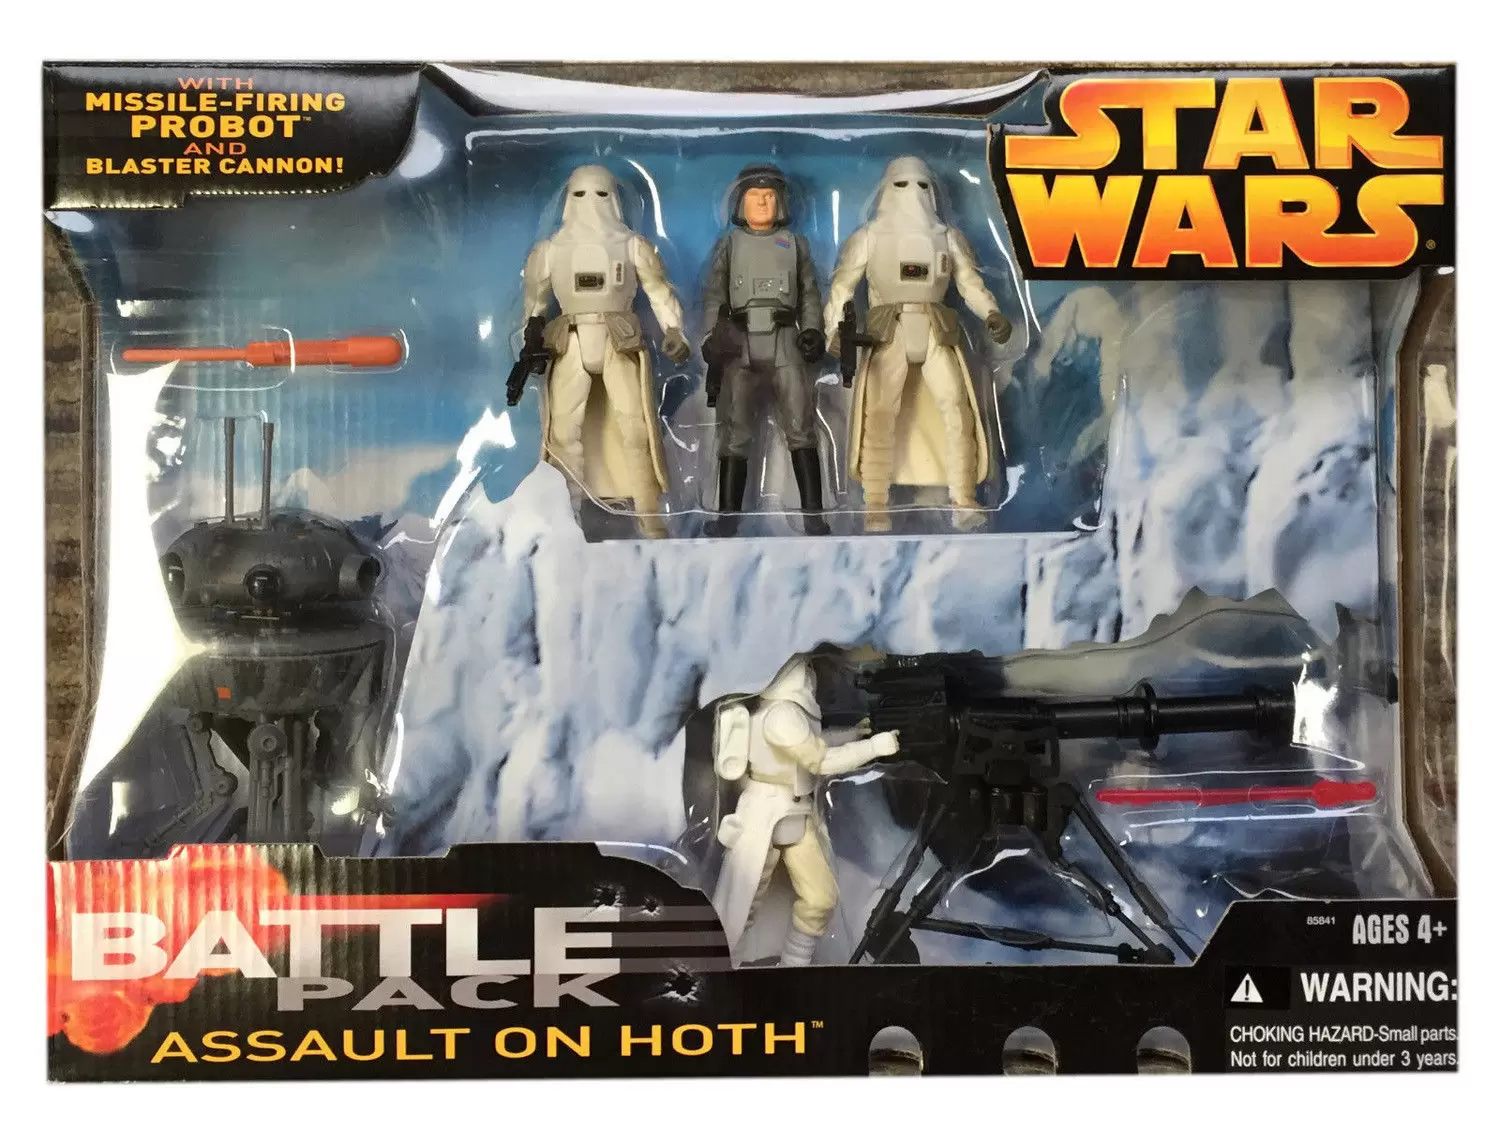 Revenge of the Sith - Assault on Hoth